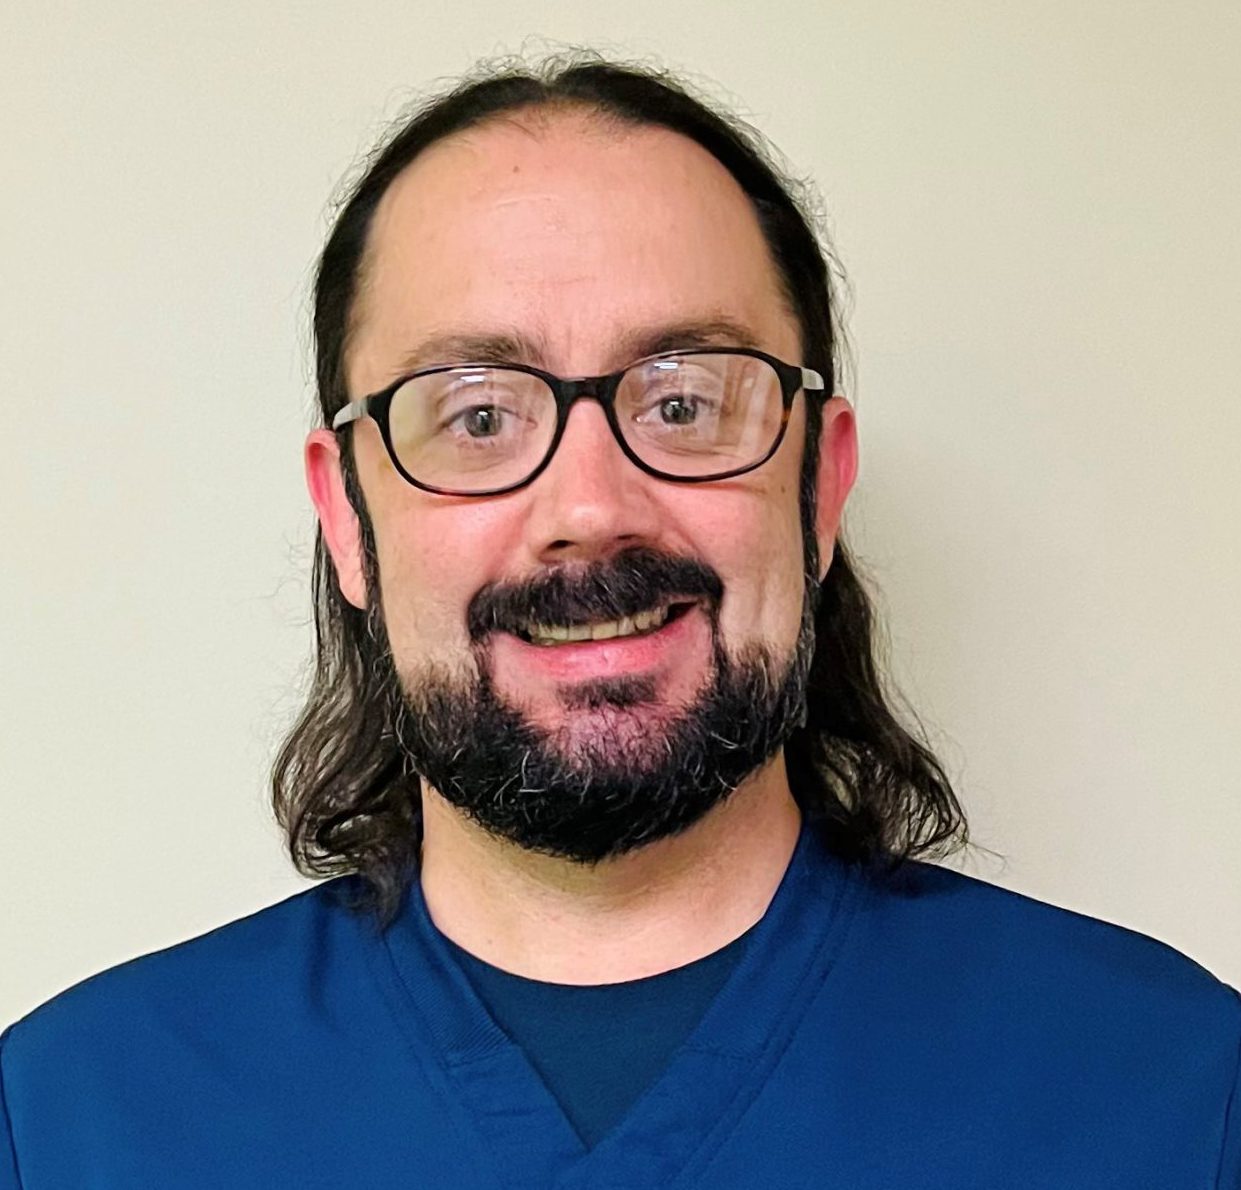 HSDC staff member Chris Stefanile smiles for the camera. Chris is male, with dark hair, pull back in ponytail. He is wearing glasses and blue scrub.